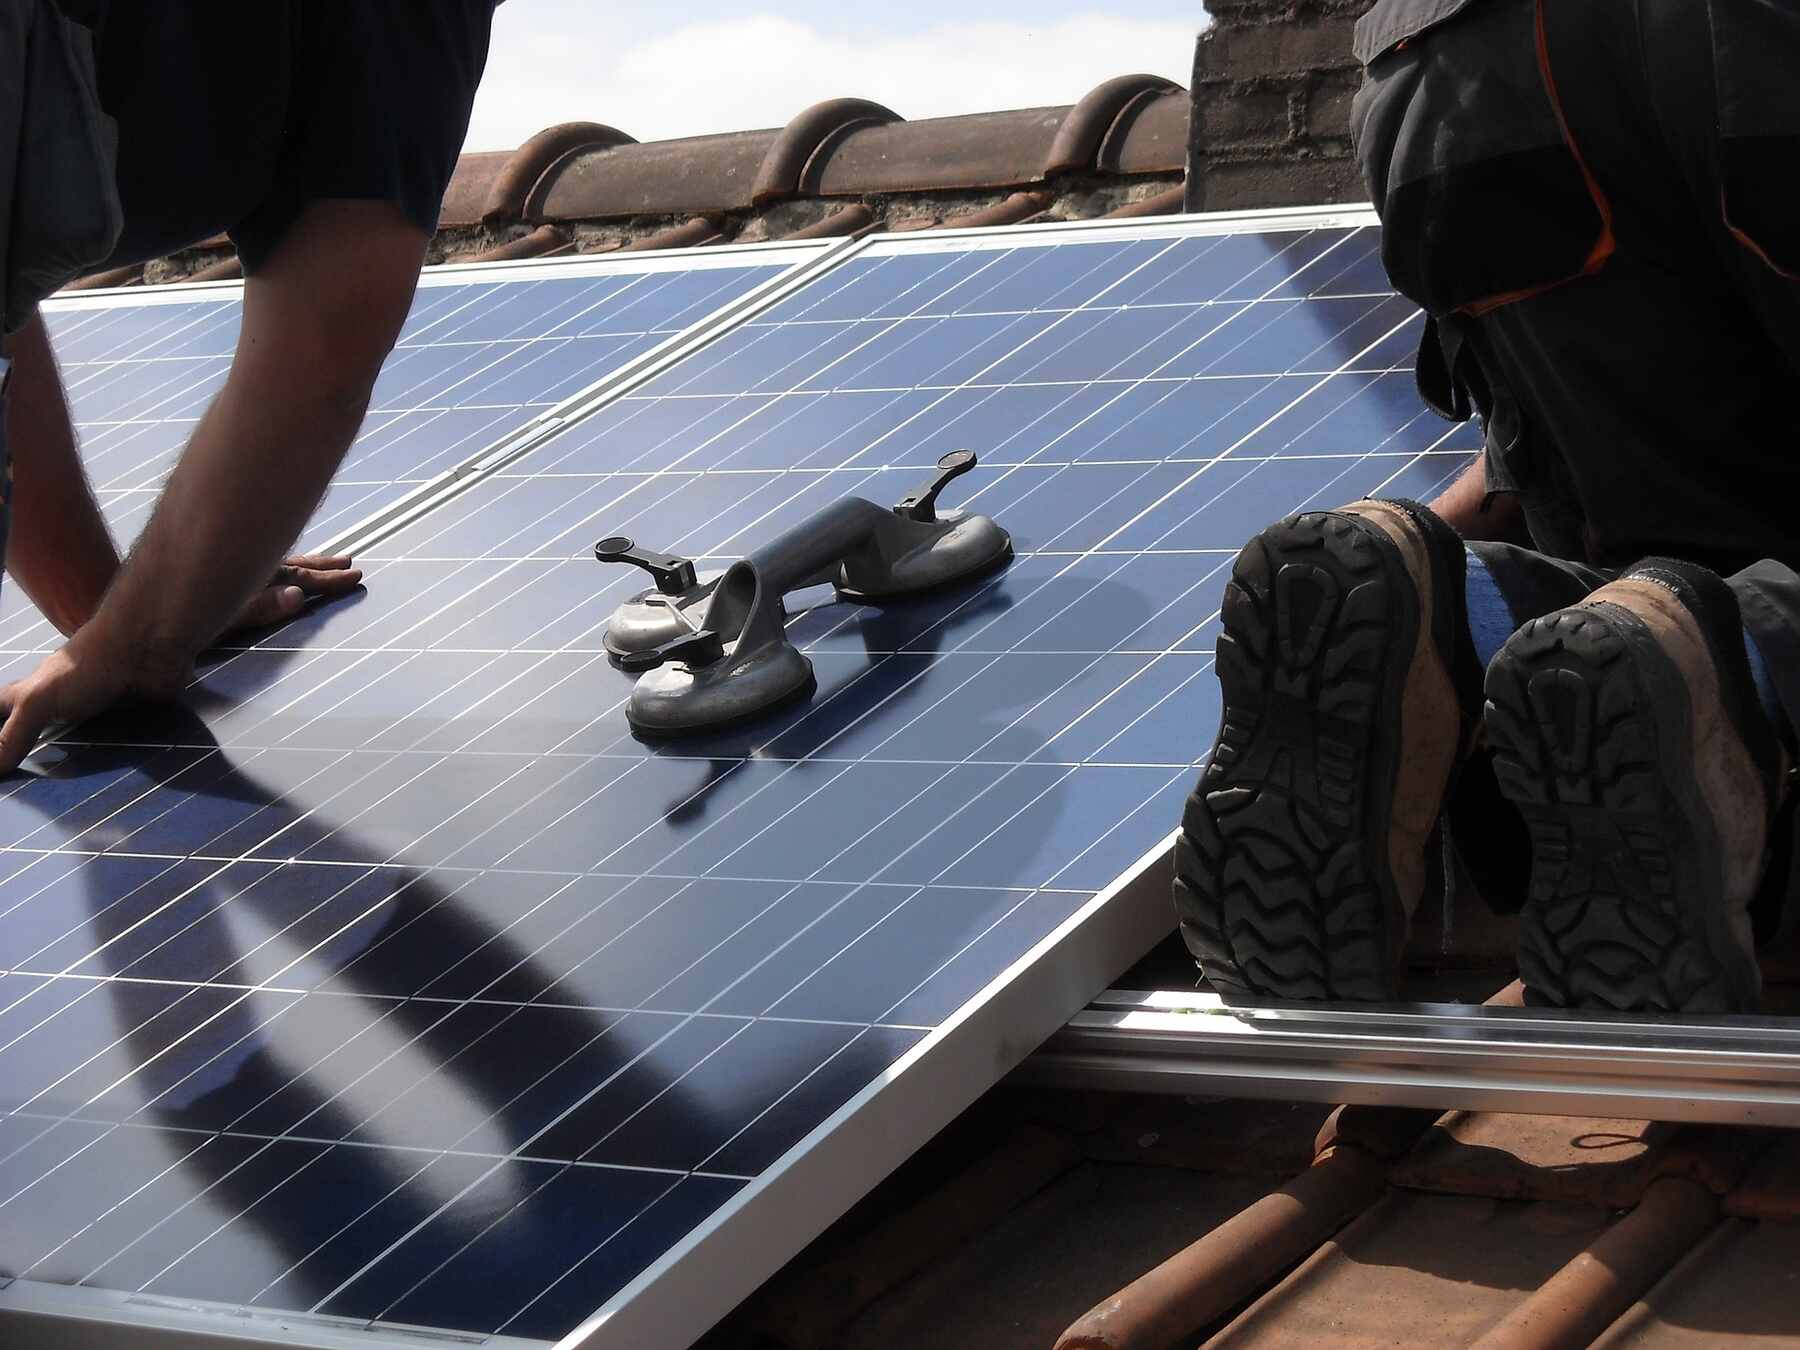 Two men installing solar panels on a house roof